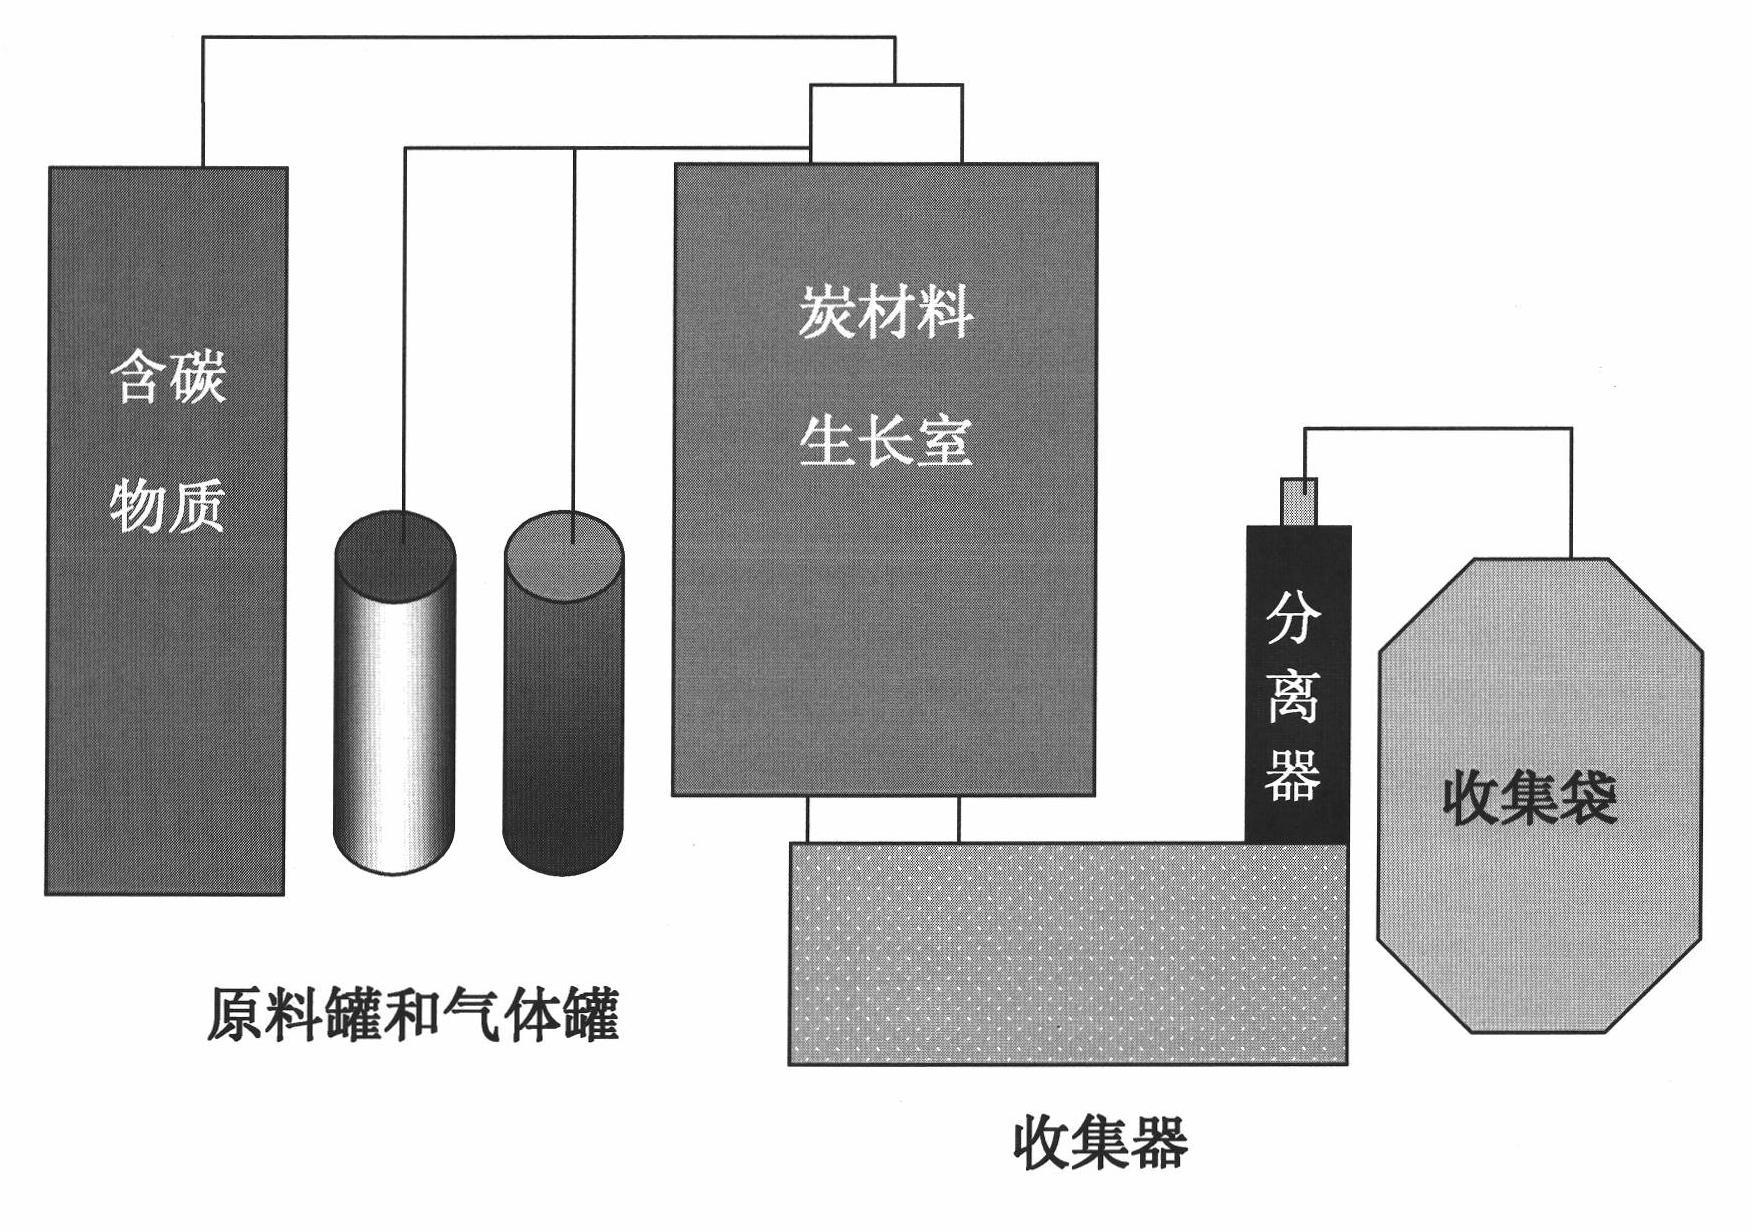 Process and device for industrial production of carbon nanofiber